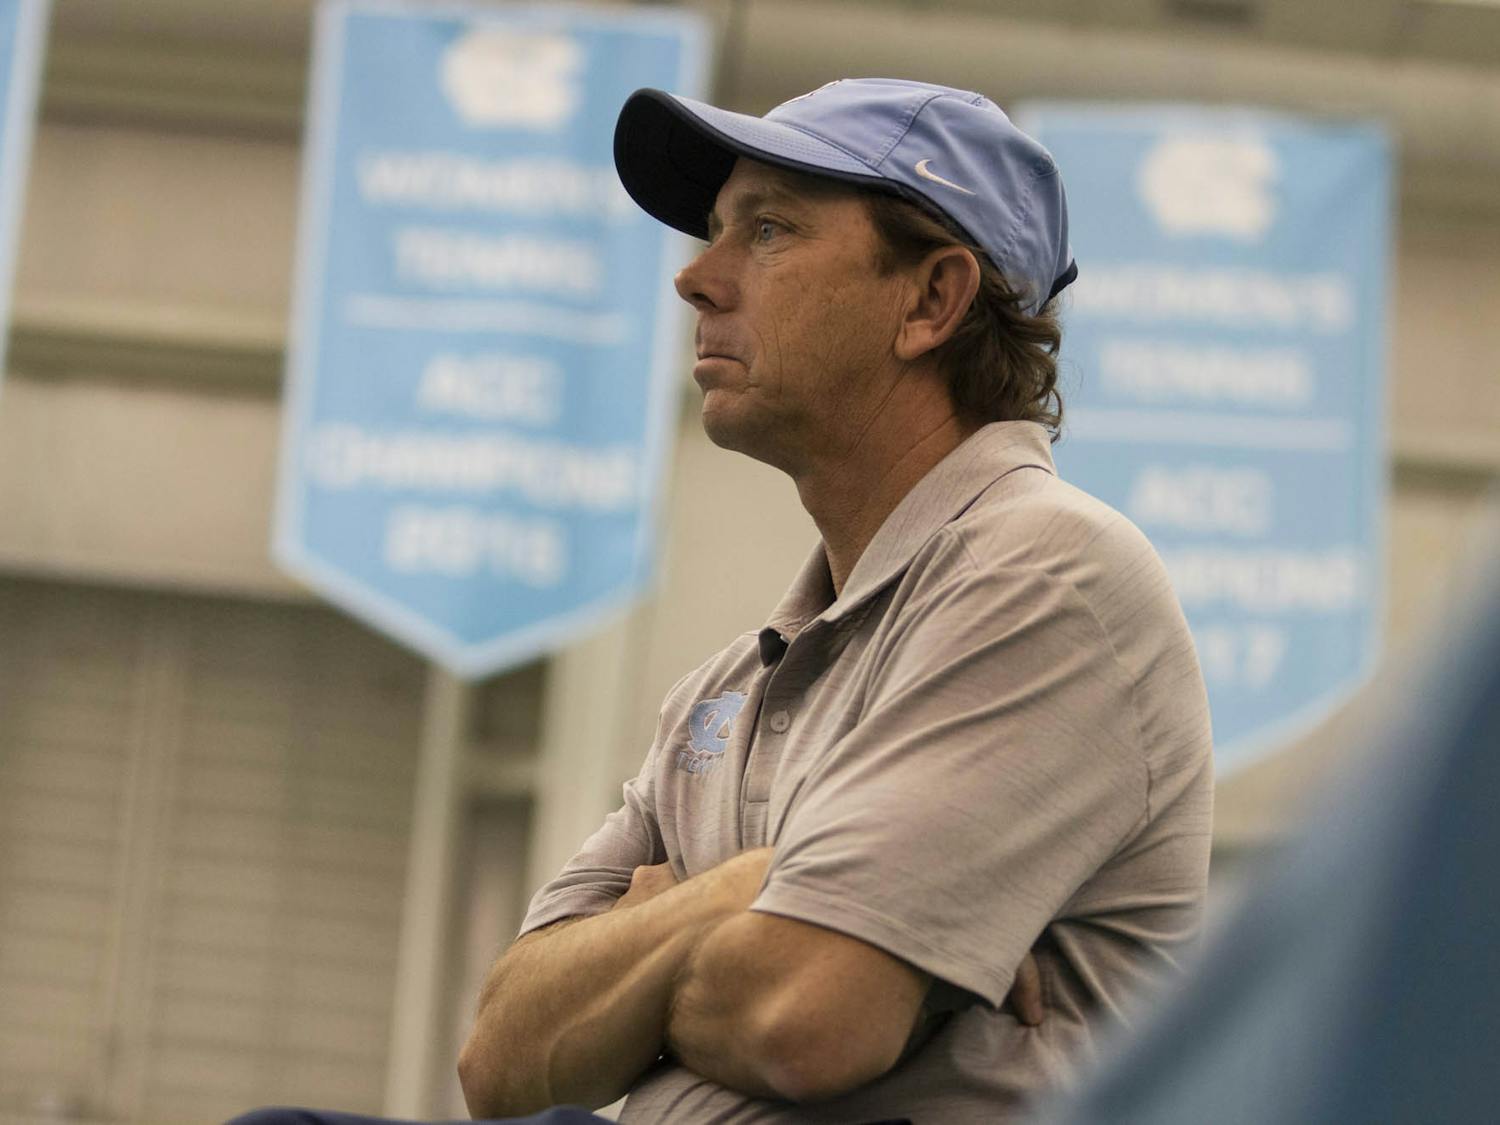 UNC women's tennis Head Coach Brian Kalbas crosses his arms on the sidelines as he observes the team play against Vanderbilt on Sunday, Feb. 2, 2020. UNC won 7-0.